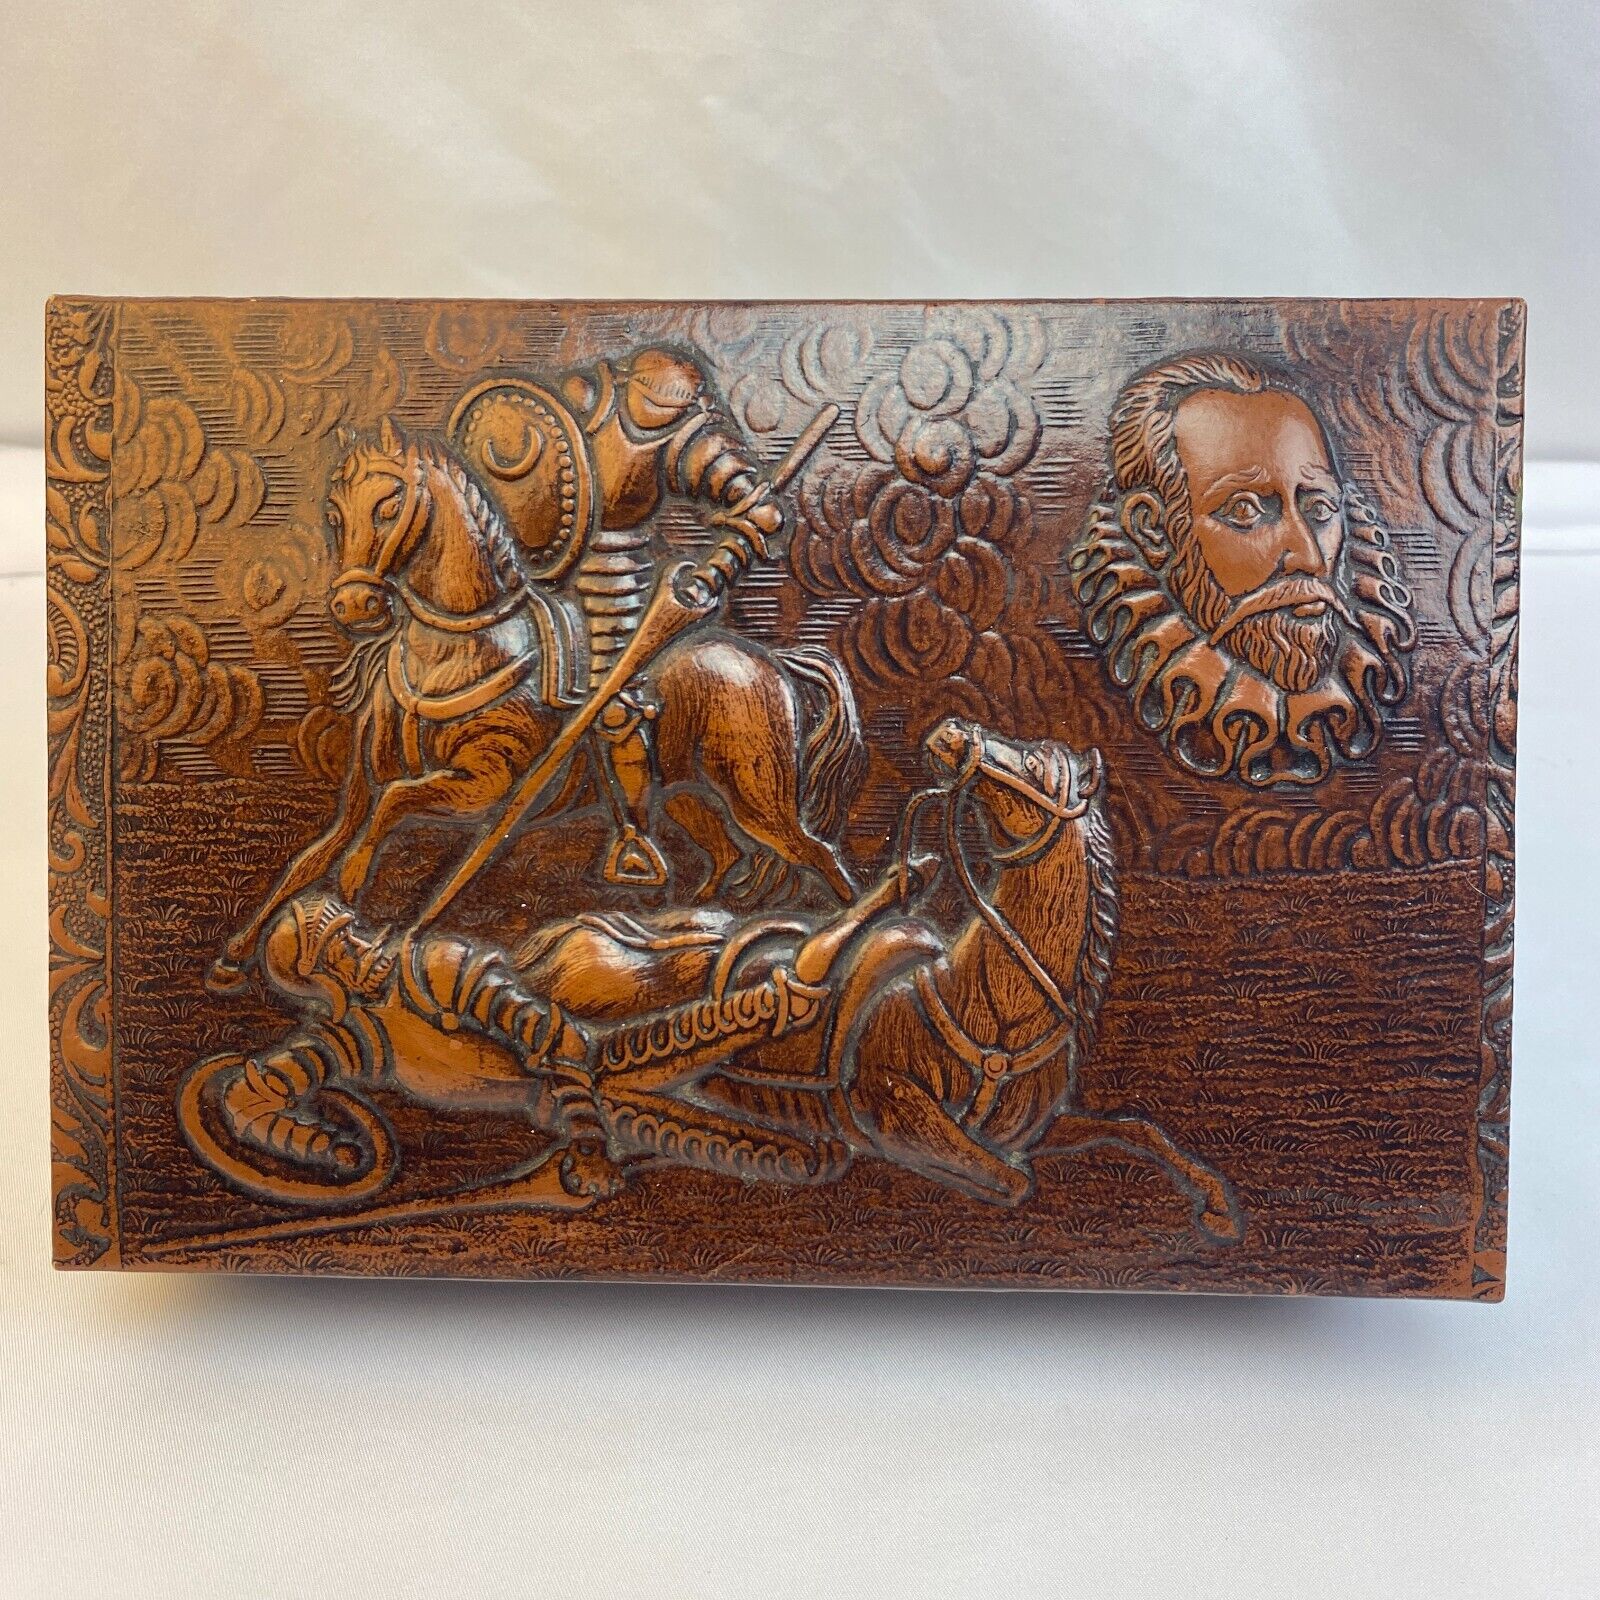 Vintage Don Quixote Embossed Leather Covered Cigarette/Cigar Wooden Box - NICE